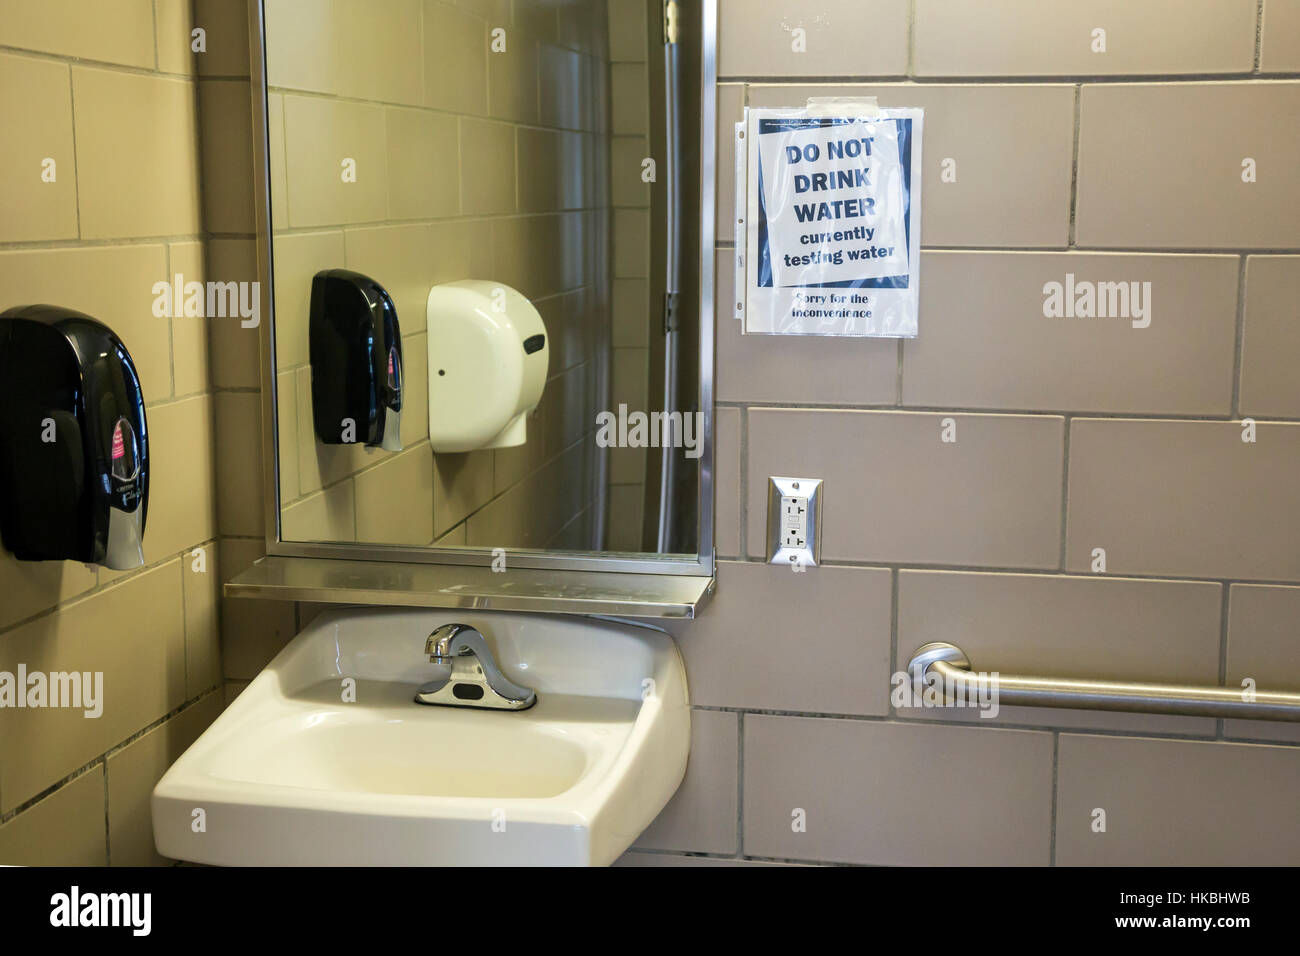 Findlay, Ohio - A sign warns against drinking the water at a rest area on Interstate 75. Stock Photo